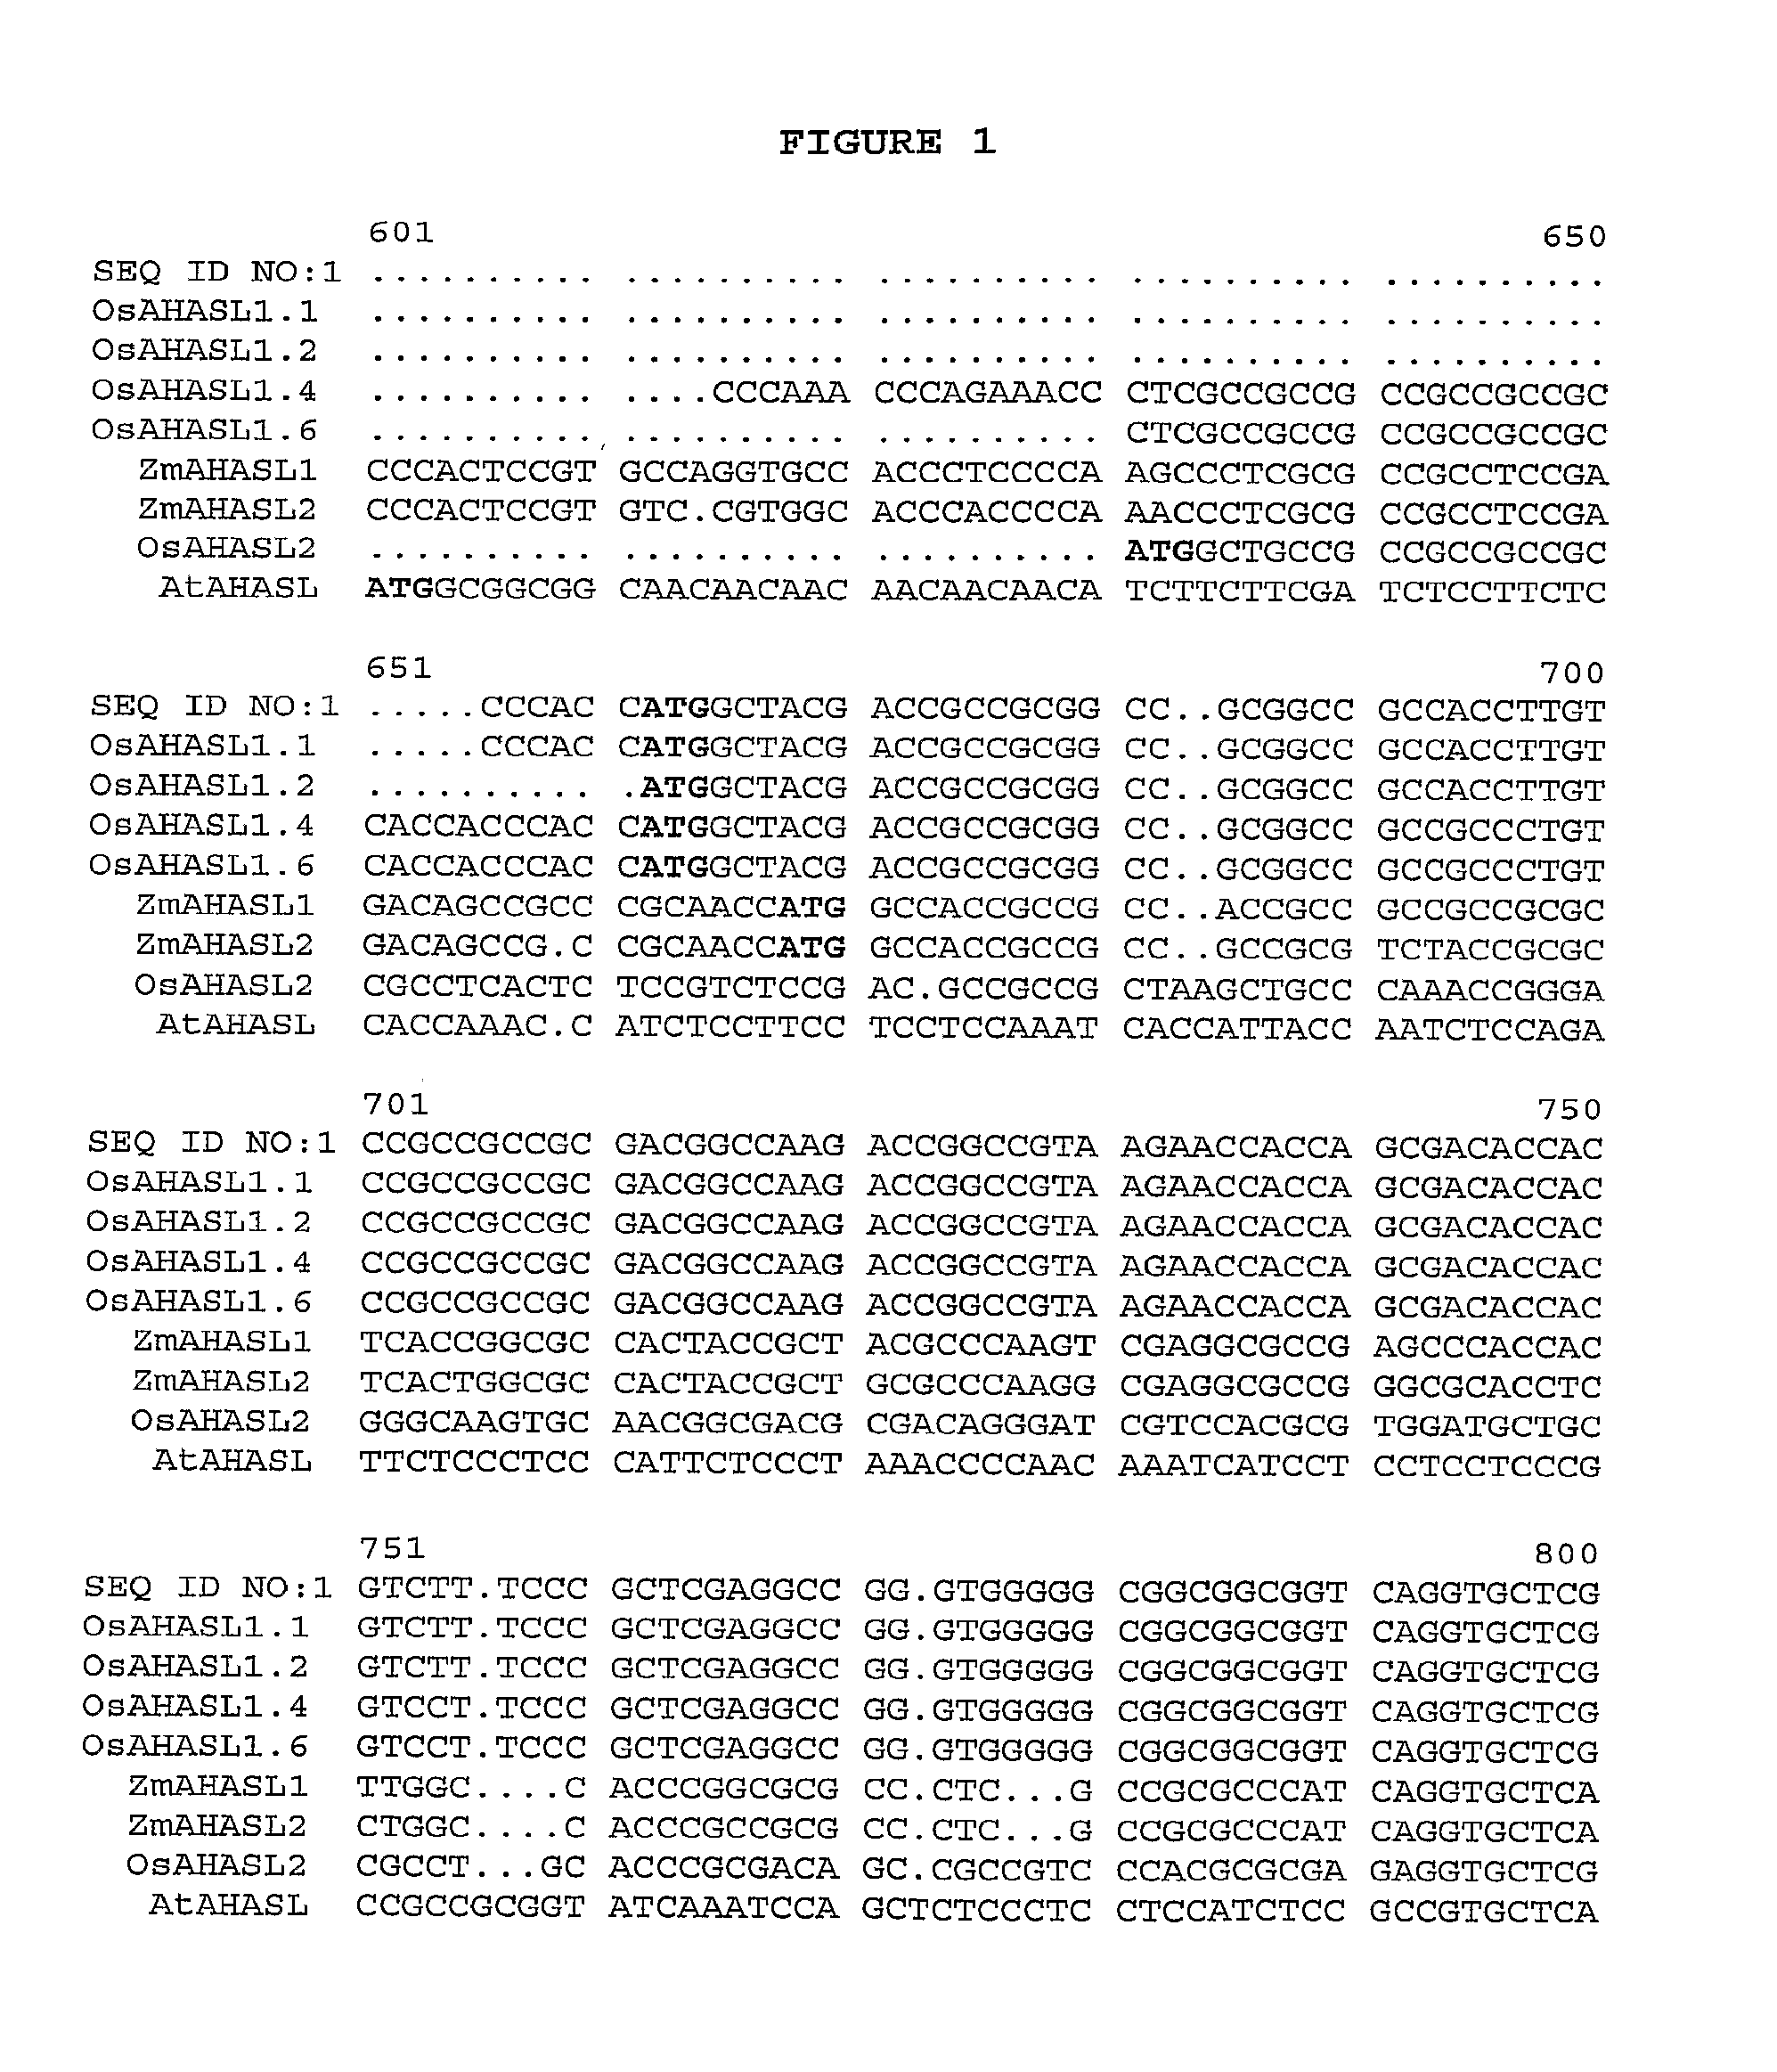 Herbicide-resistant rice plants, polynucleotides encoding herbicide resistant acetohydroxyacid synthase large subunit proteins, and methods of use